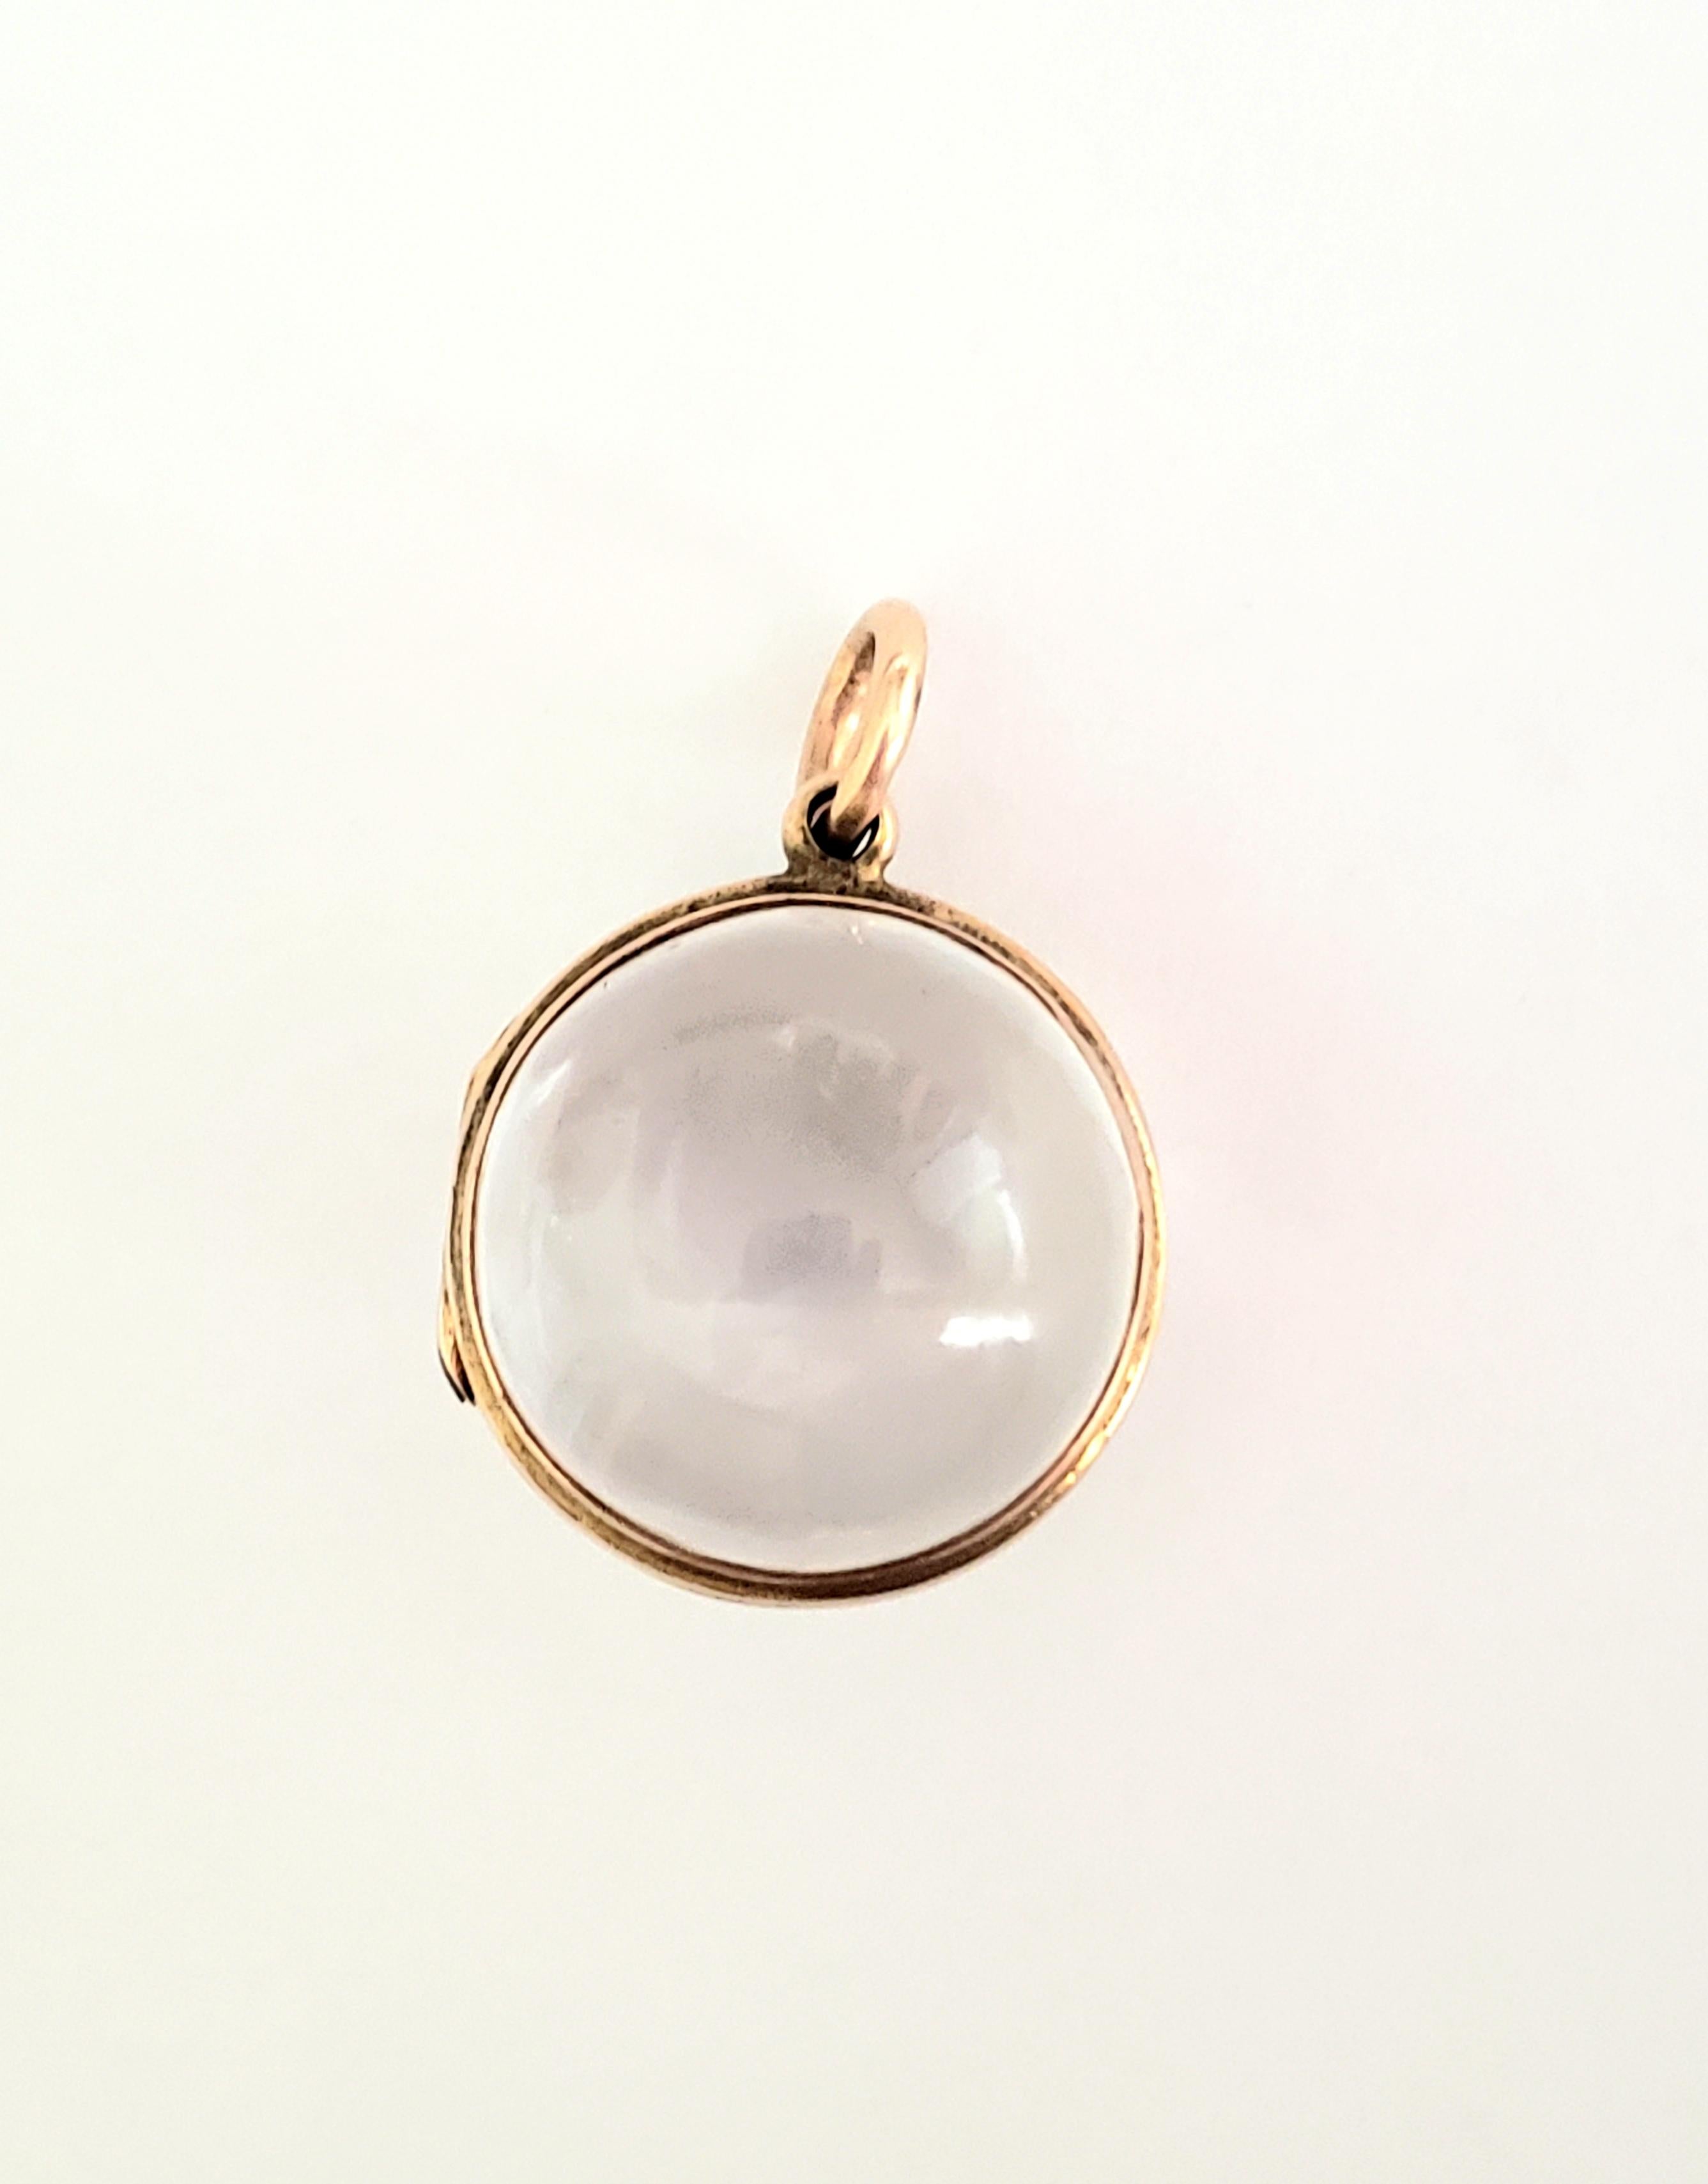 An antique Victorian hand carved Rock Crystal locket pendant in gold mount. 

Width including mount 20mm.
Total drop 27mm.
Weight 10.9gr.
Unmarked, tested positive for gold. 

The locket in good working order, the Rock Crystal with a small chip